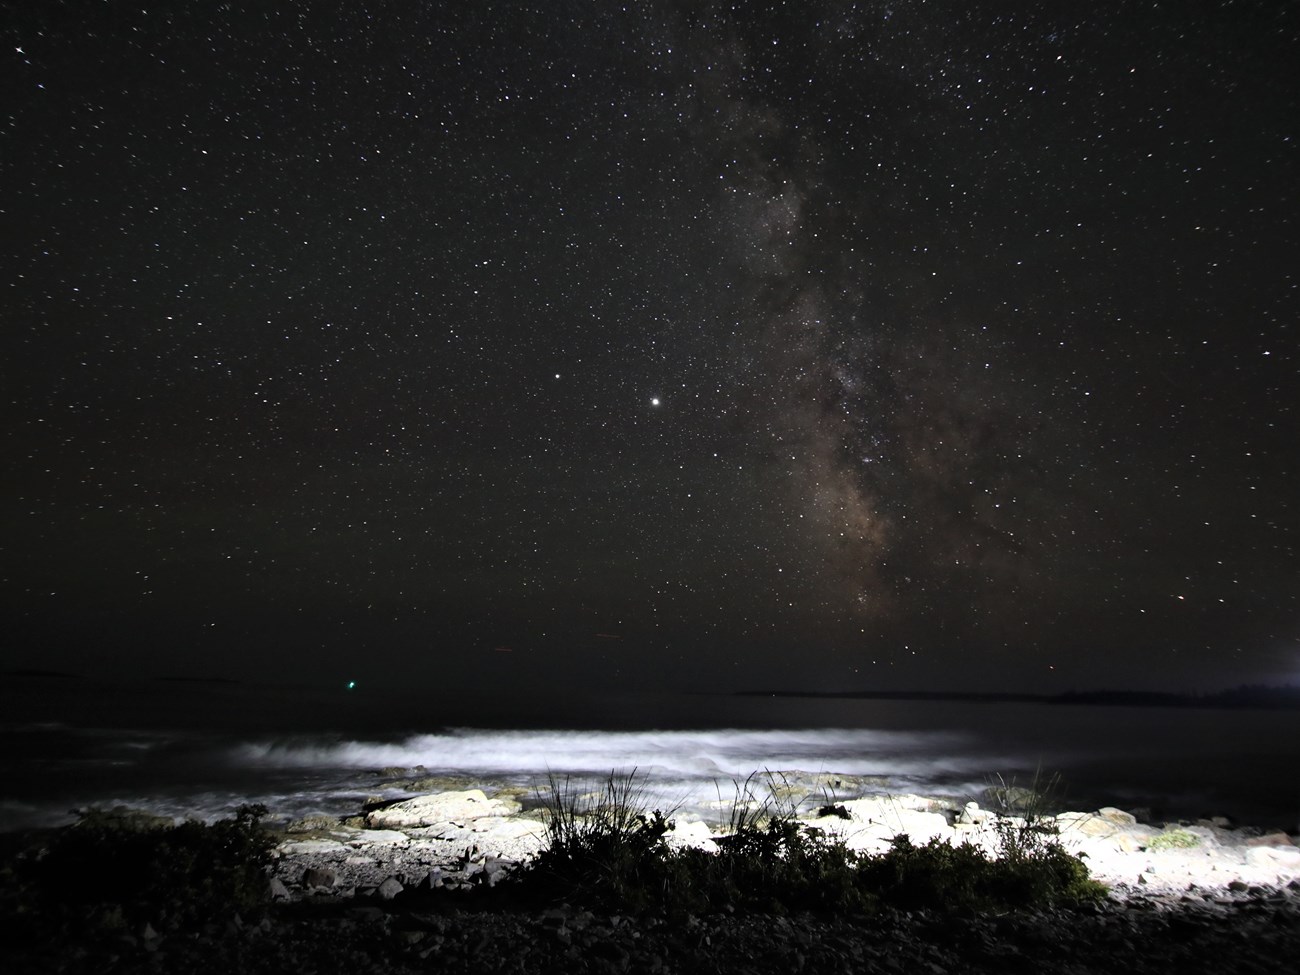 Milky Way over ocean from Seawall Picnic Area